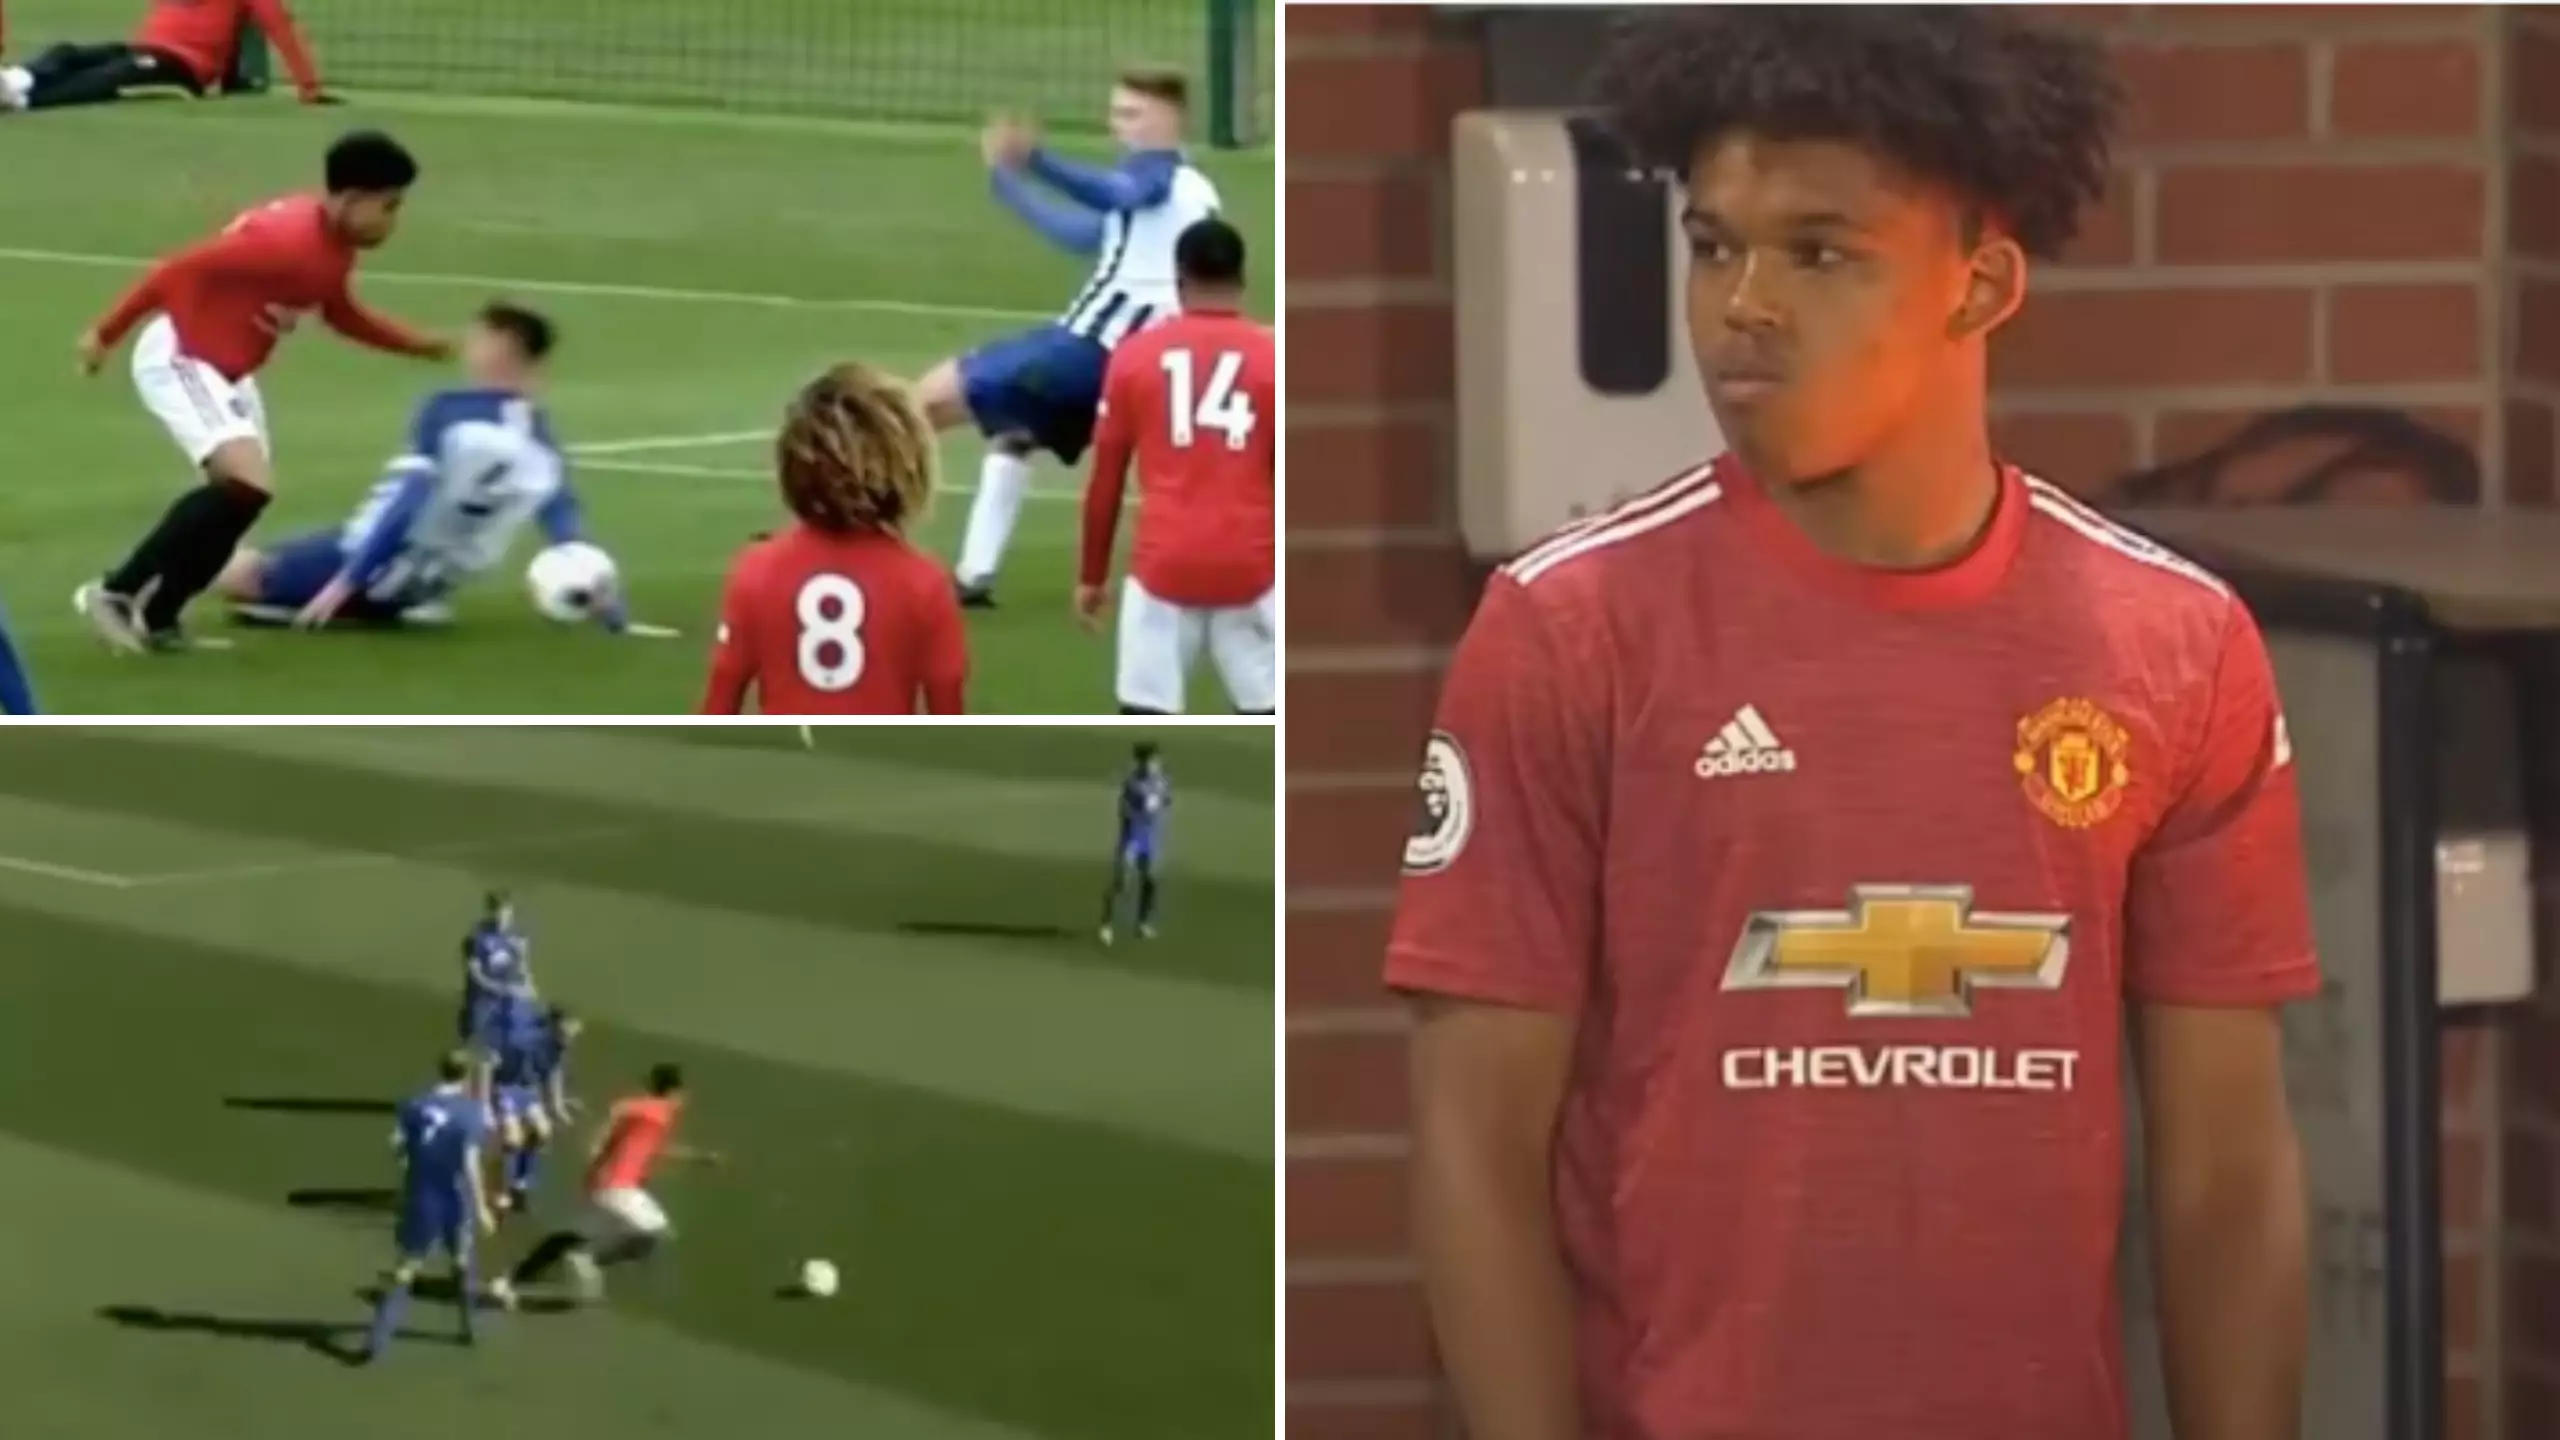 Meet The 16-Year-Old Sensation Manchester United Think Is "The Next Jadon Sancho"